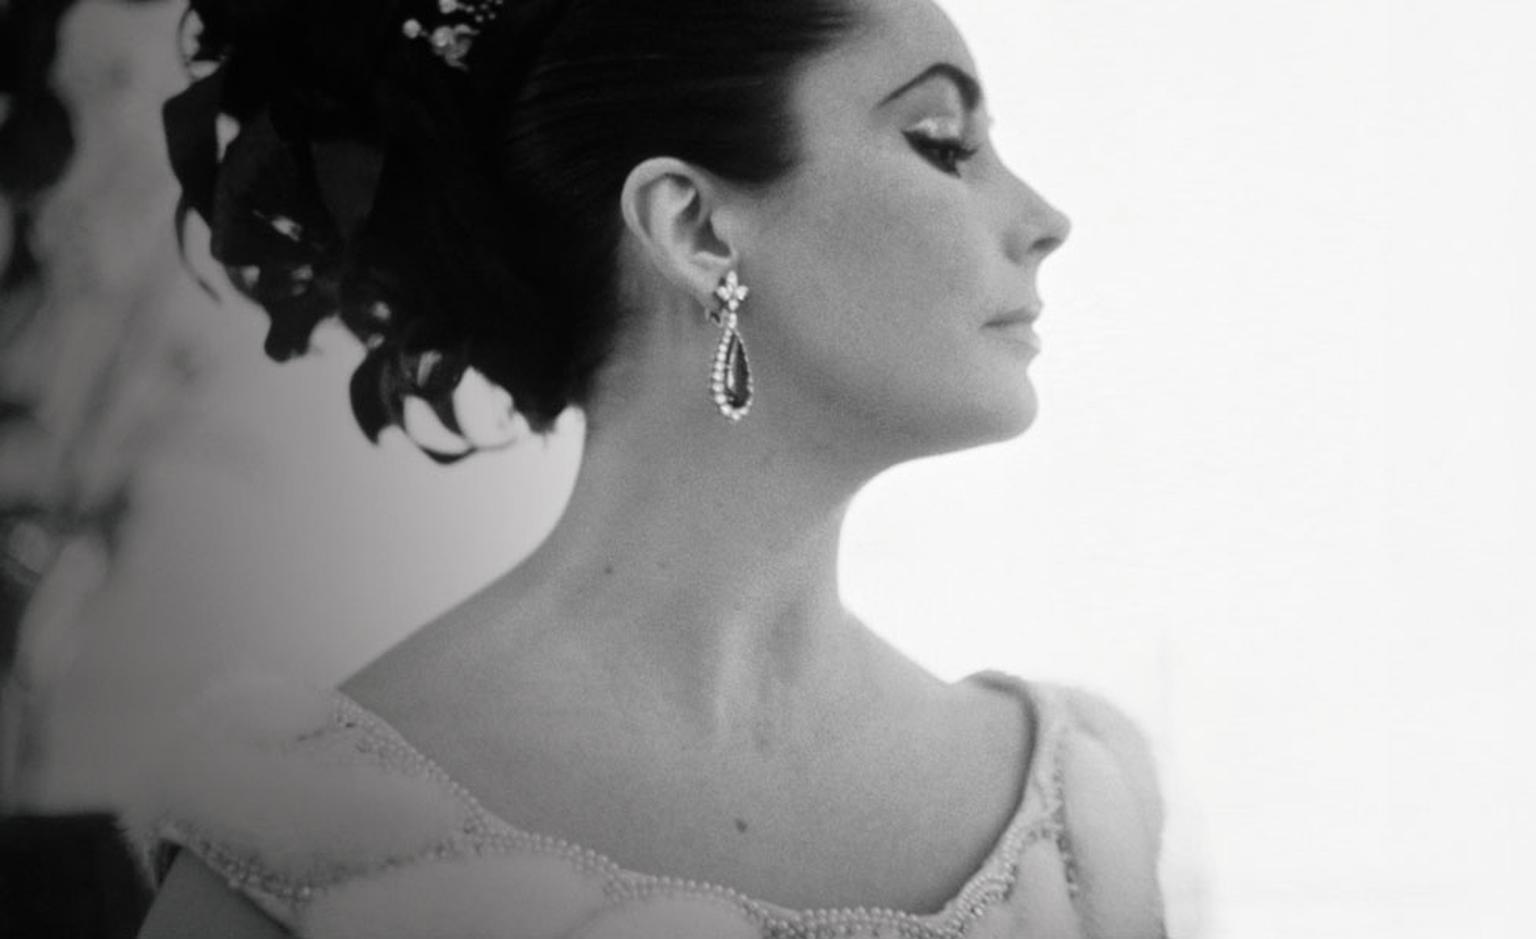 Elizabeth Taylor wearing the Bulgari emerald earrings that are on display at the V&A as part of the new Glamour of Italian Fashion exhibition. Photo: CORBIS